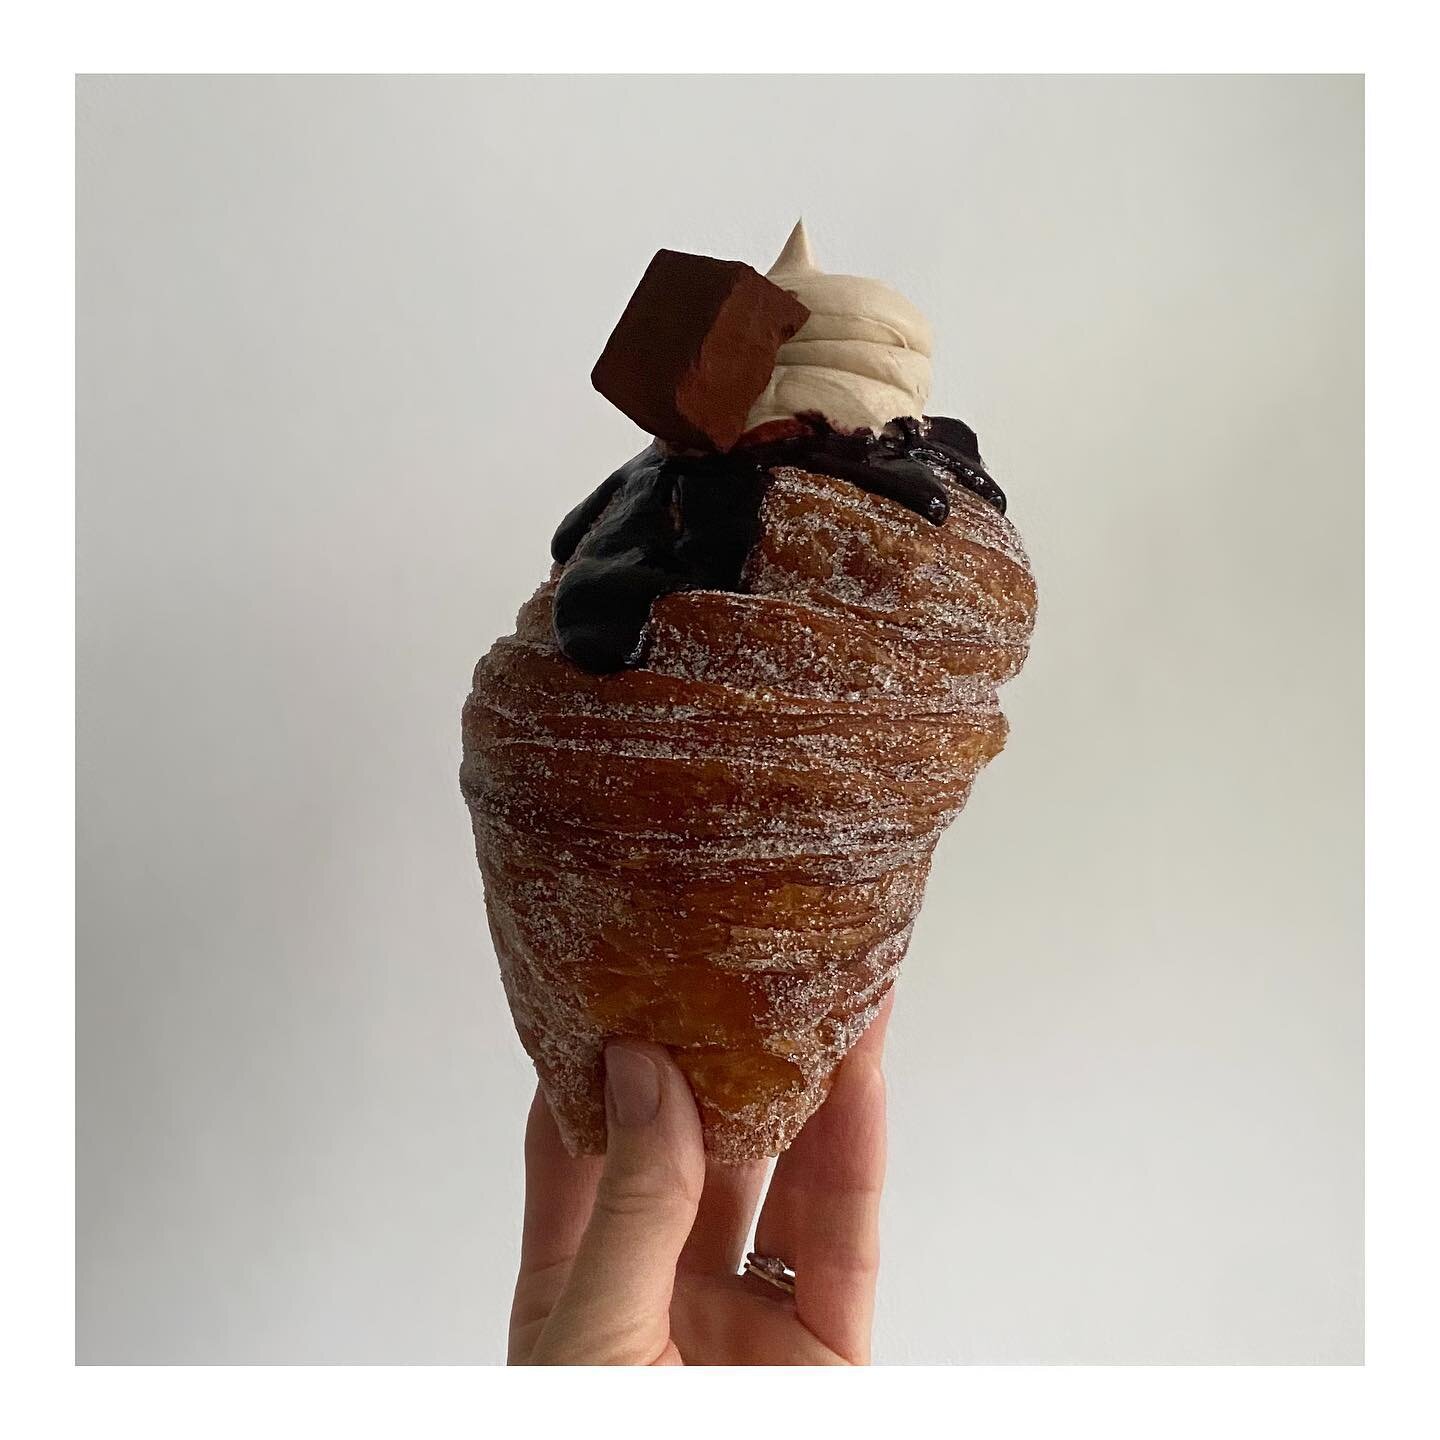 &bull; The Staple Cruffin &bull; Chocolate Creme Pat, Drizzled with Cherry Syrup &amp; Topped with a Staple Handmade Chocolate &bull; 
.
.
.
#staple 
#bakerycafe 
#cruffin 
#cruffins 
#broadstairs #westgateonsea #ramsgate #margate #thanet